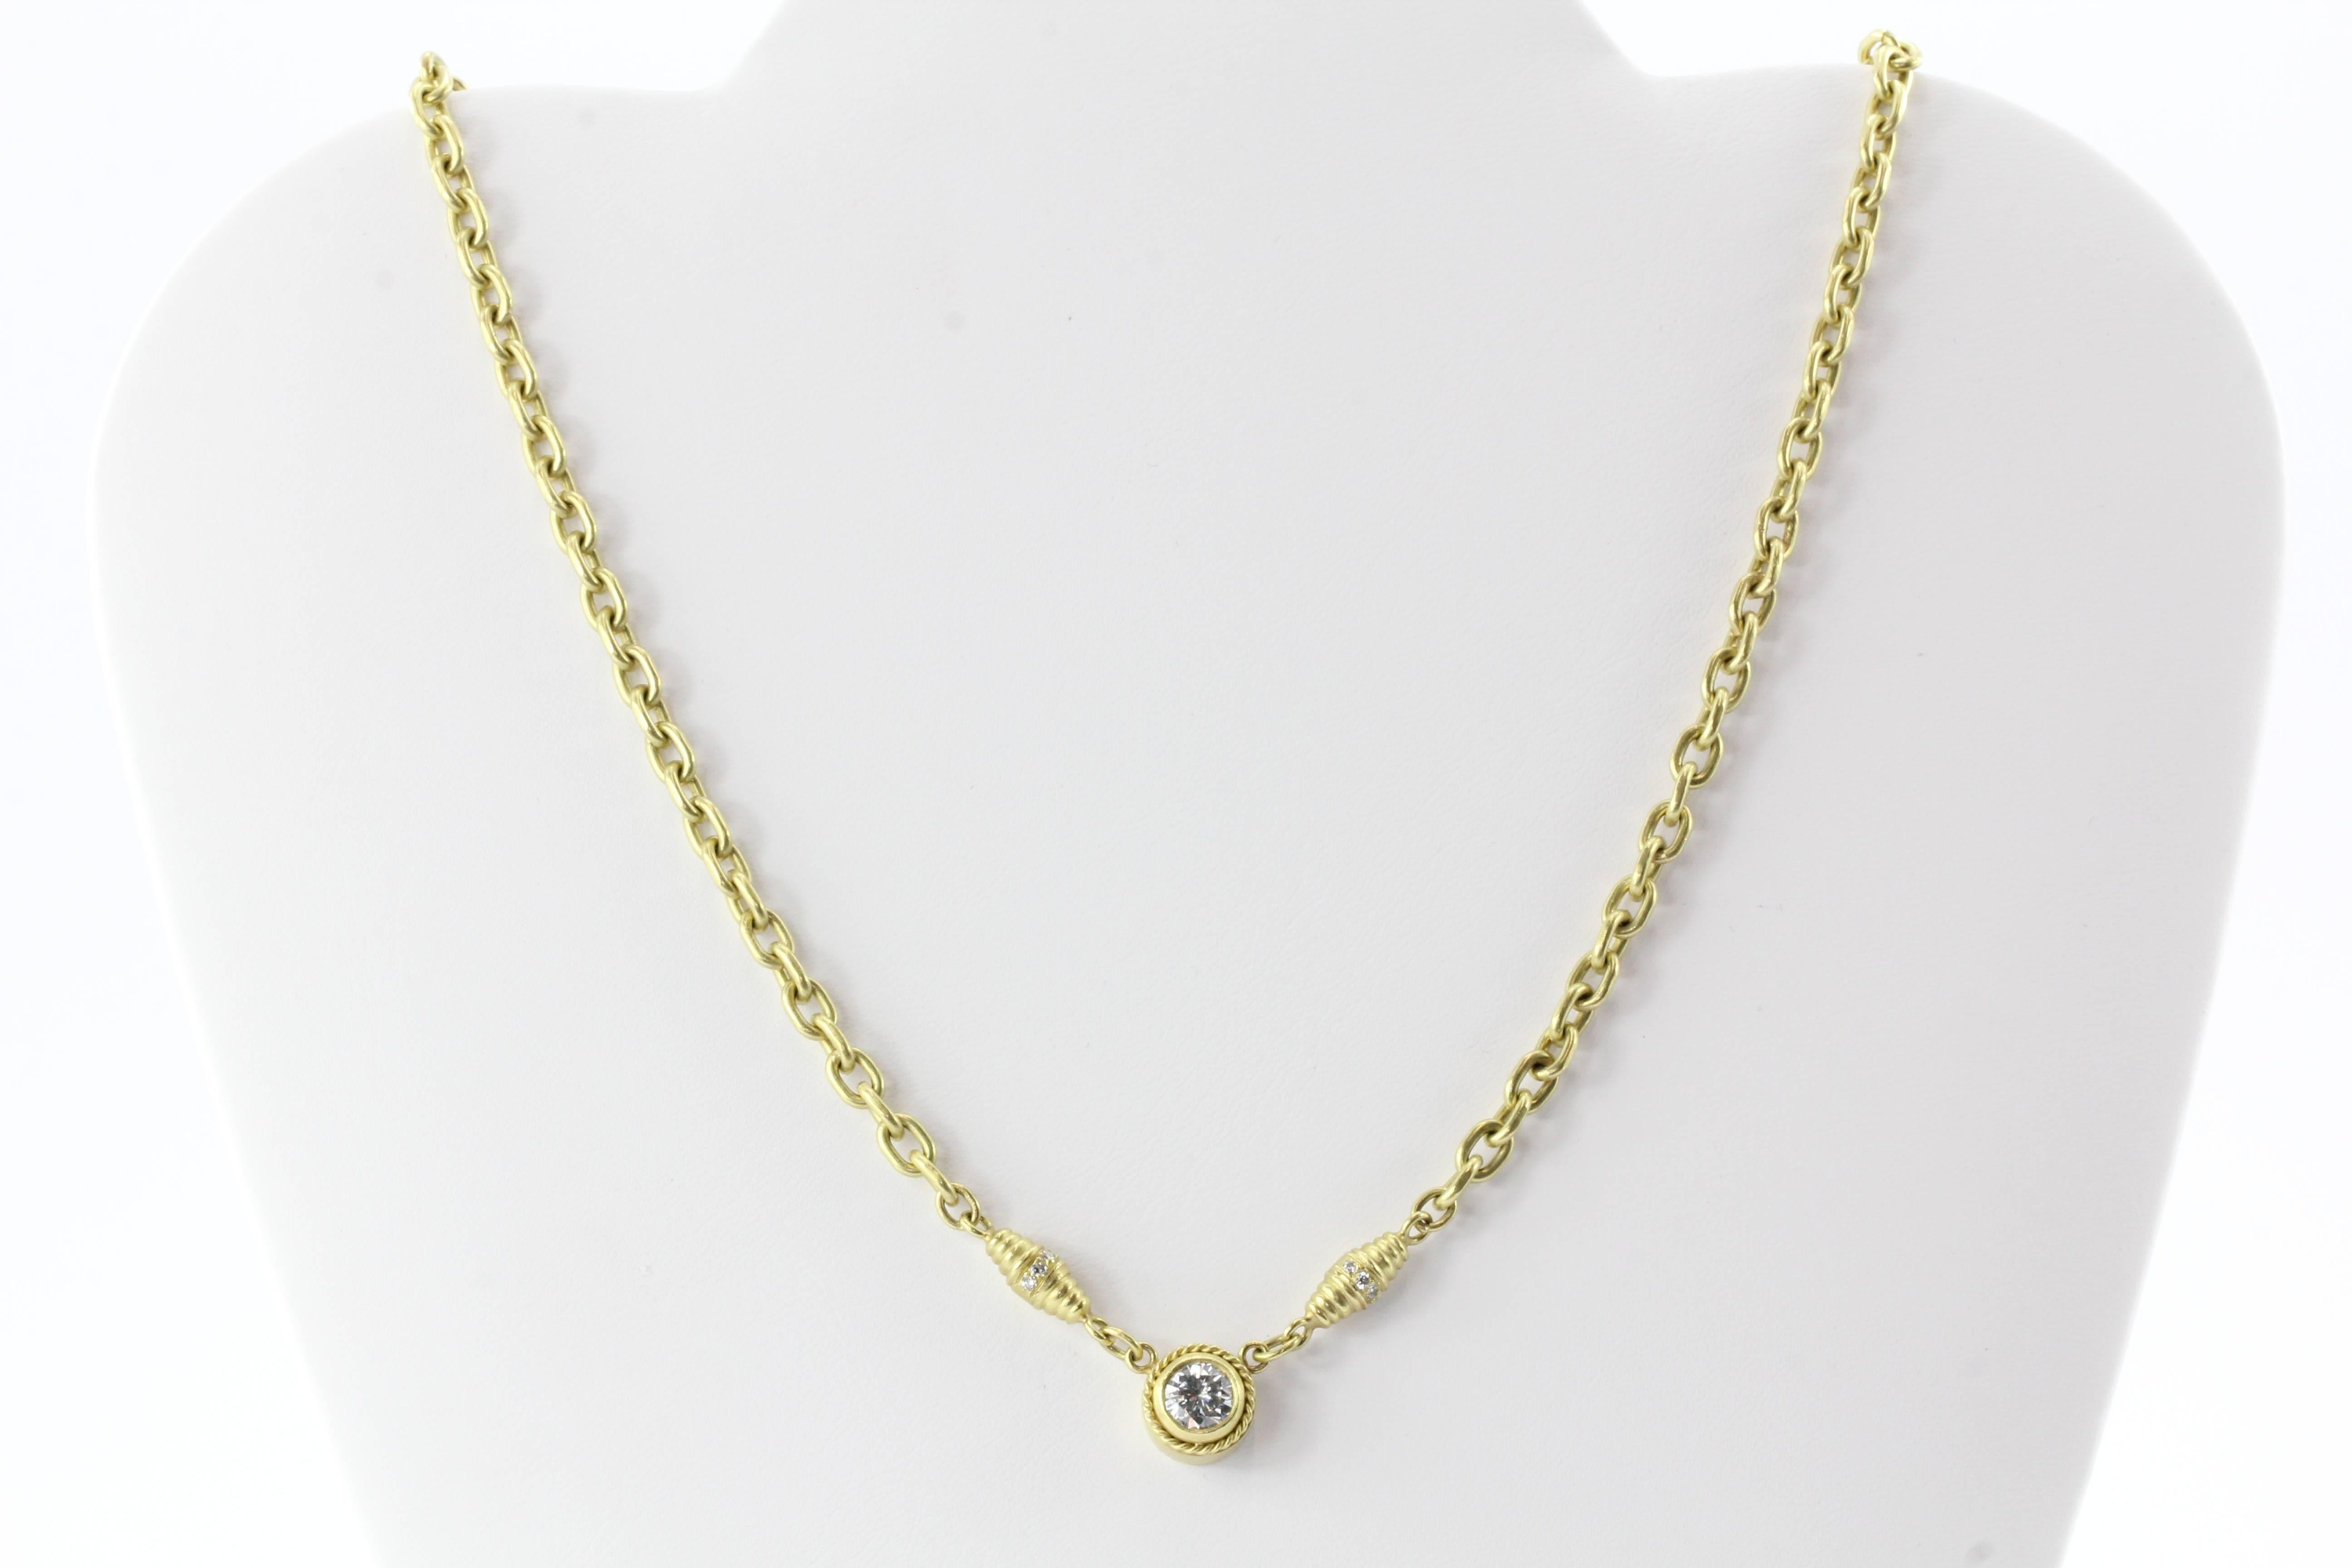 Women's Brushed Finished Gold 1 Carat Diamond Solitaire Necklace